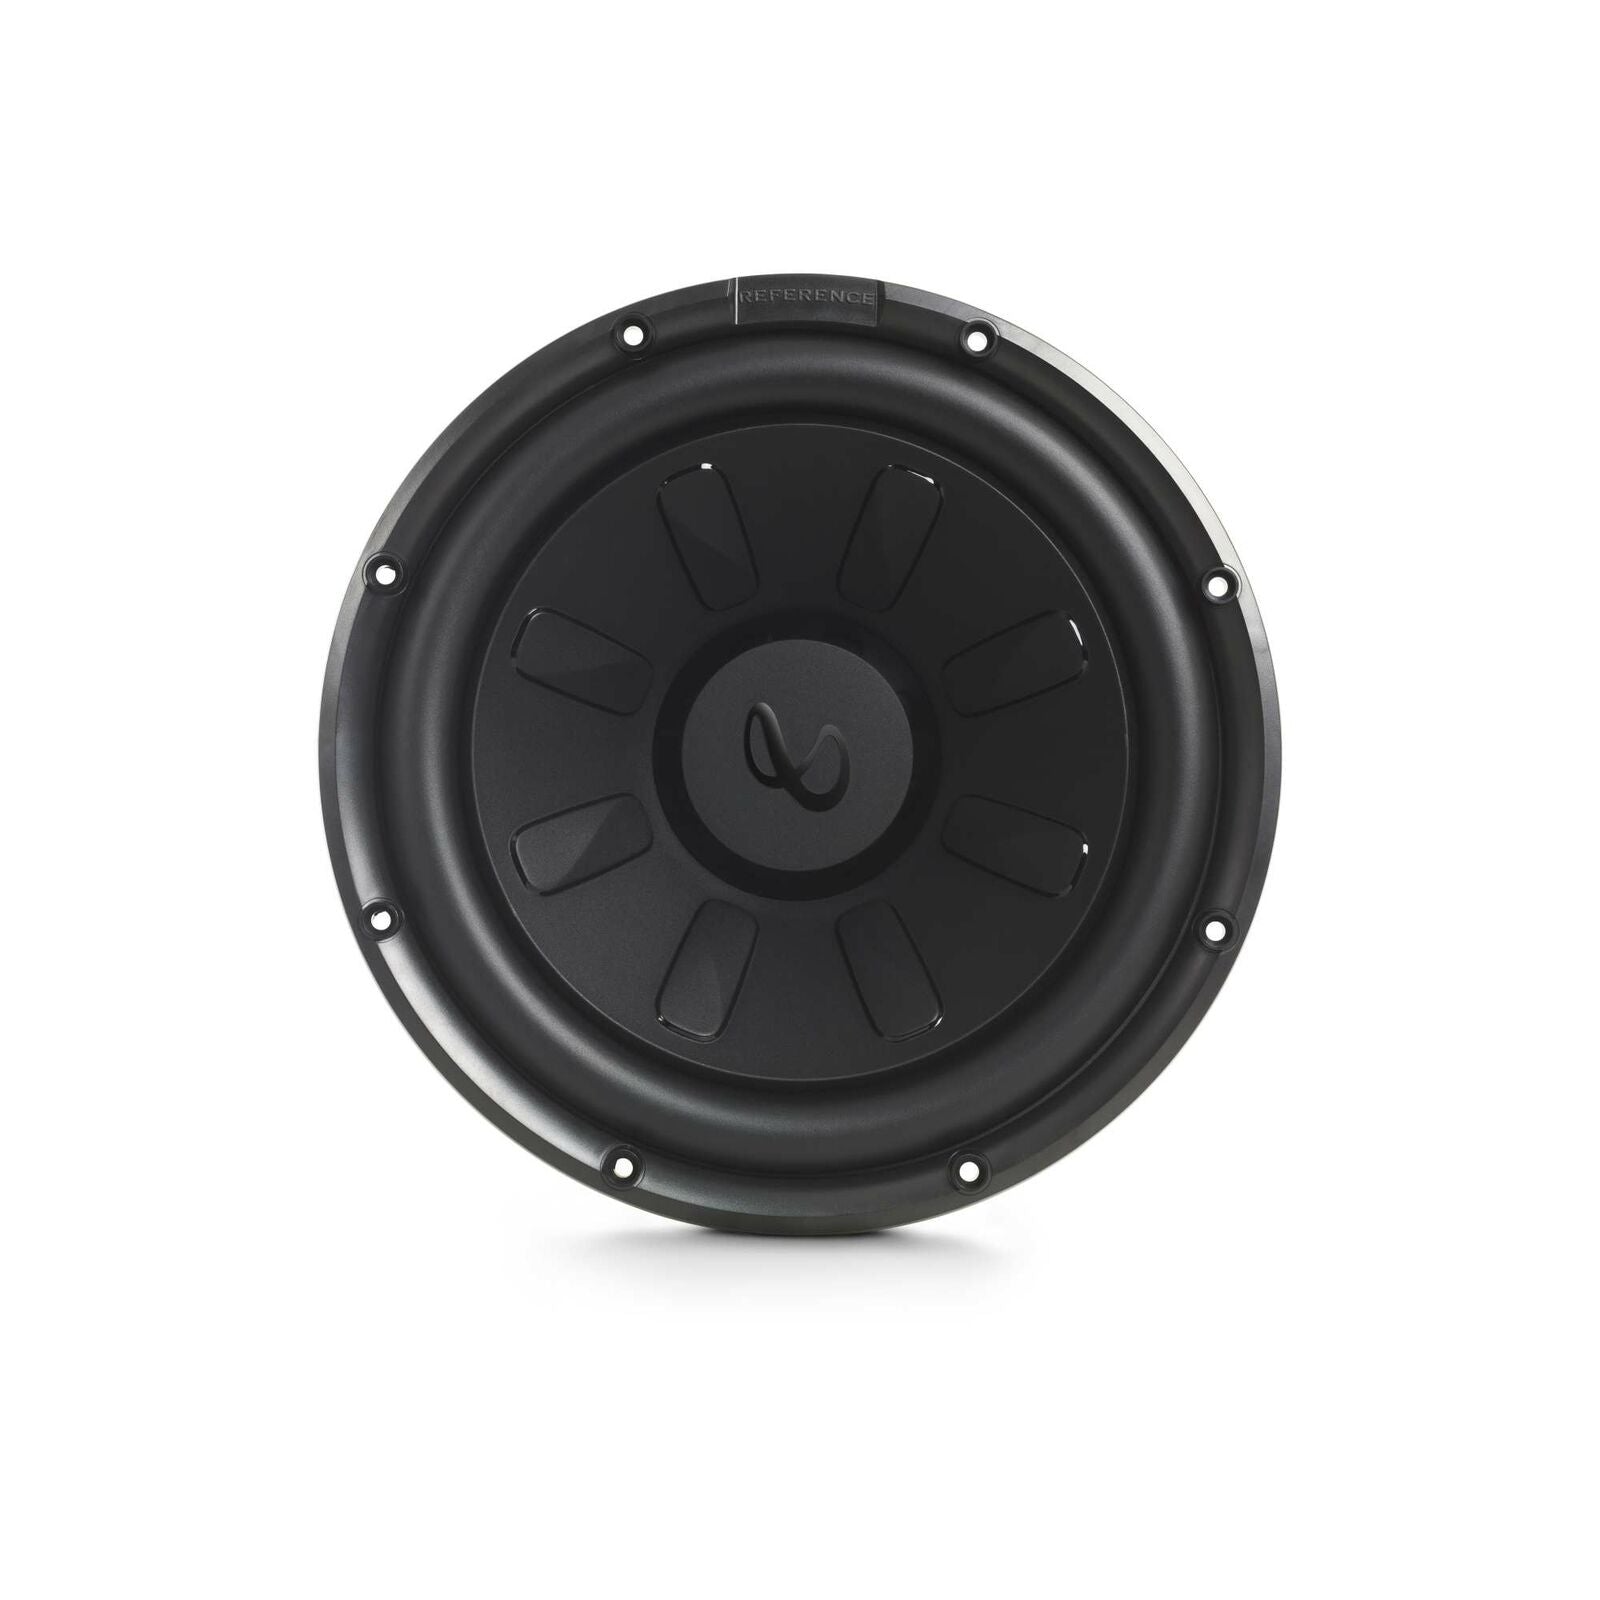 Infinity Reference 1270 12" Subwoofers Selectable 1100 Watts